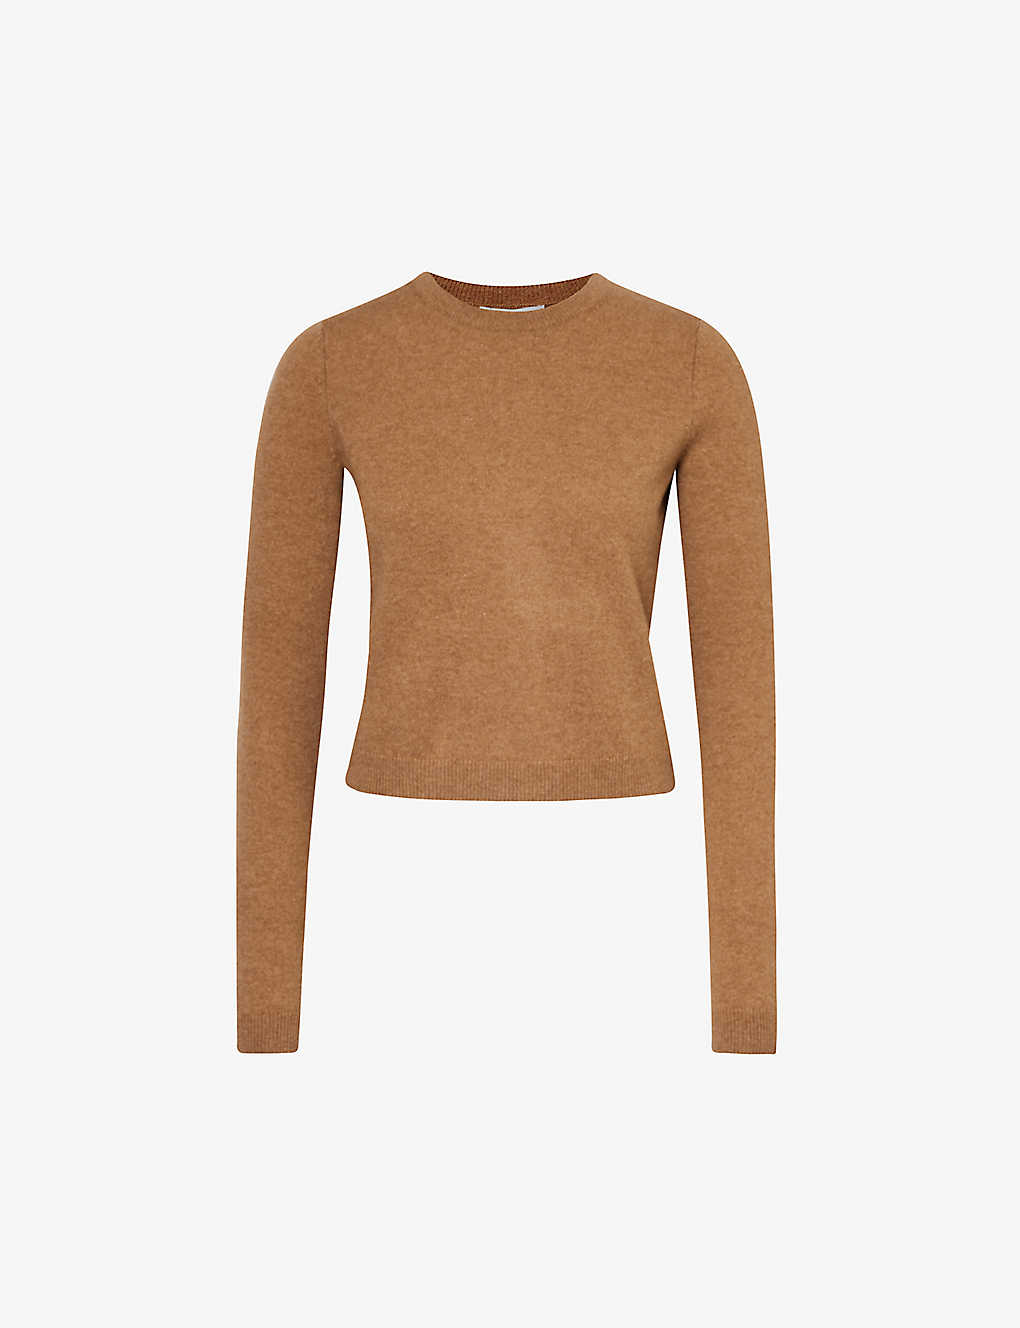 REFORMATION REFORMATION WOMEN'S CAMEL X CAMILLE ROWE VANN RECYCLED-CASHMERE AND CASHMERE-BLEND JUMPER